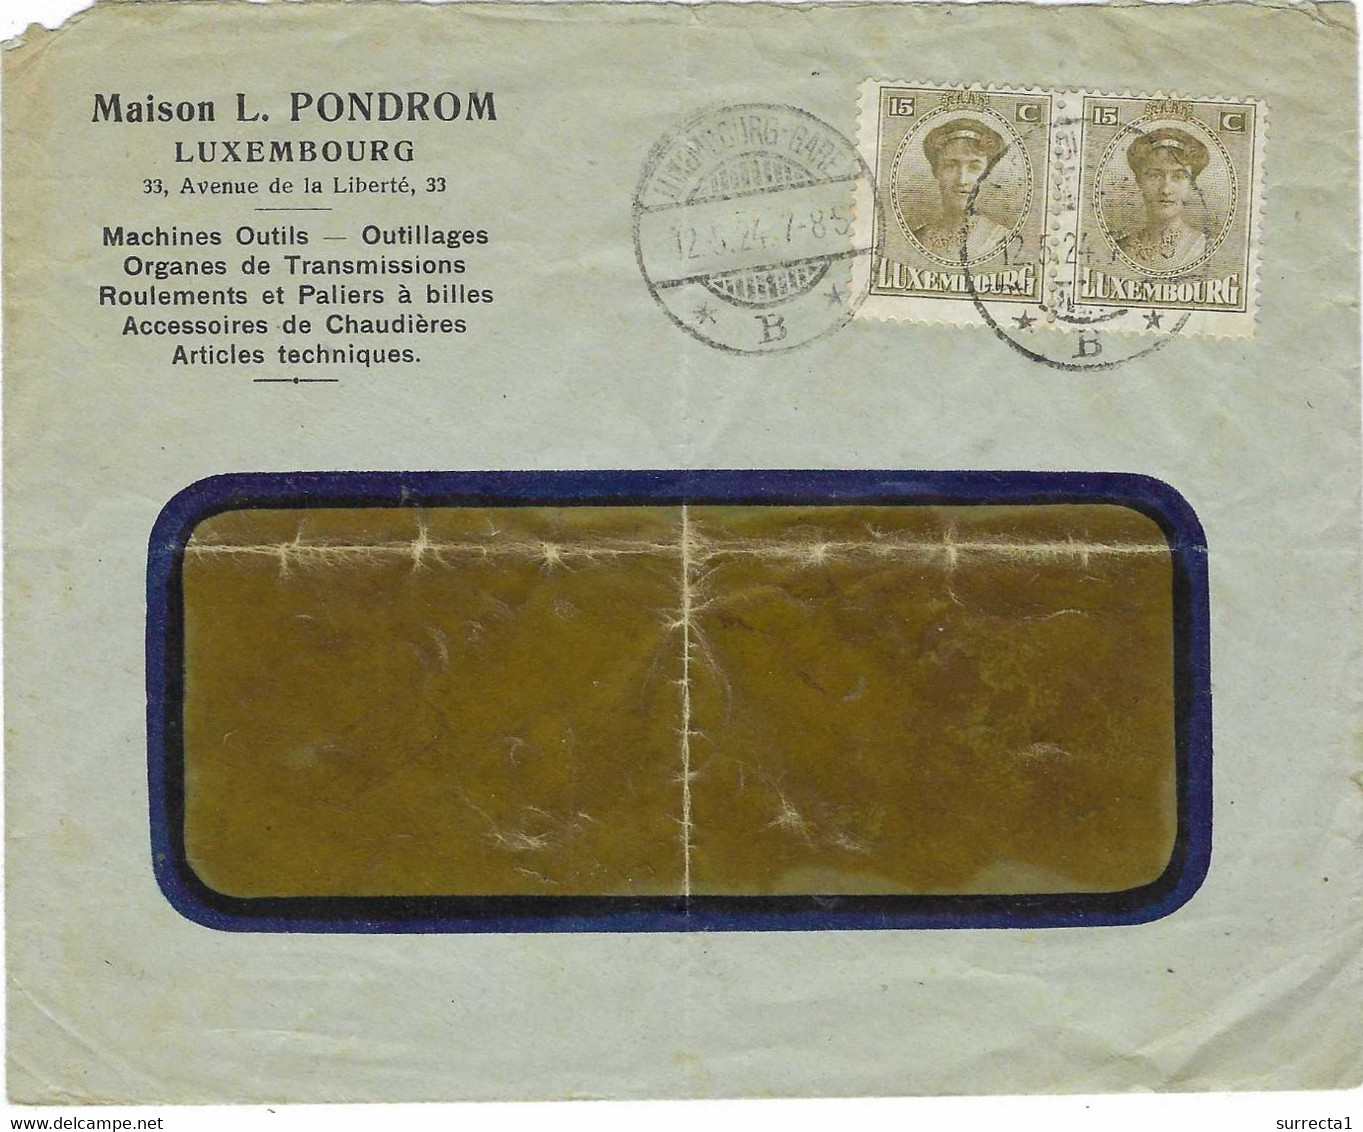 1924 / Enveloppe Commerciale PONDROM / Machines Outils / Cachet Luxembourg Gare / Flamme Besançon Verso ( Foire Expo) - Luxembourg